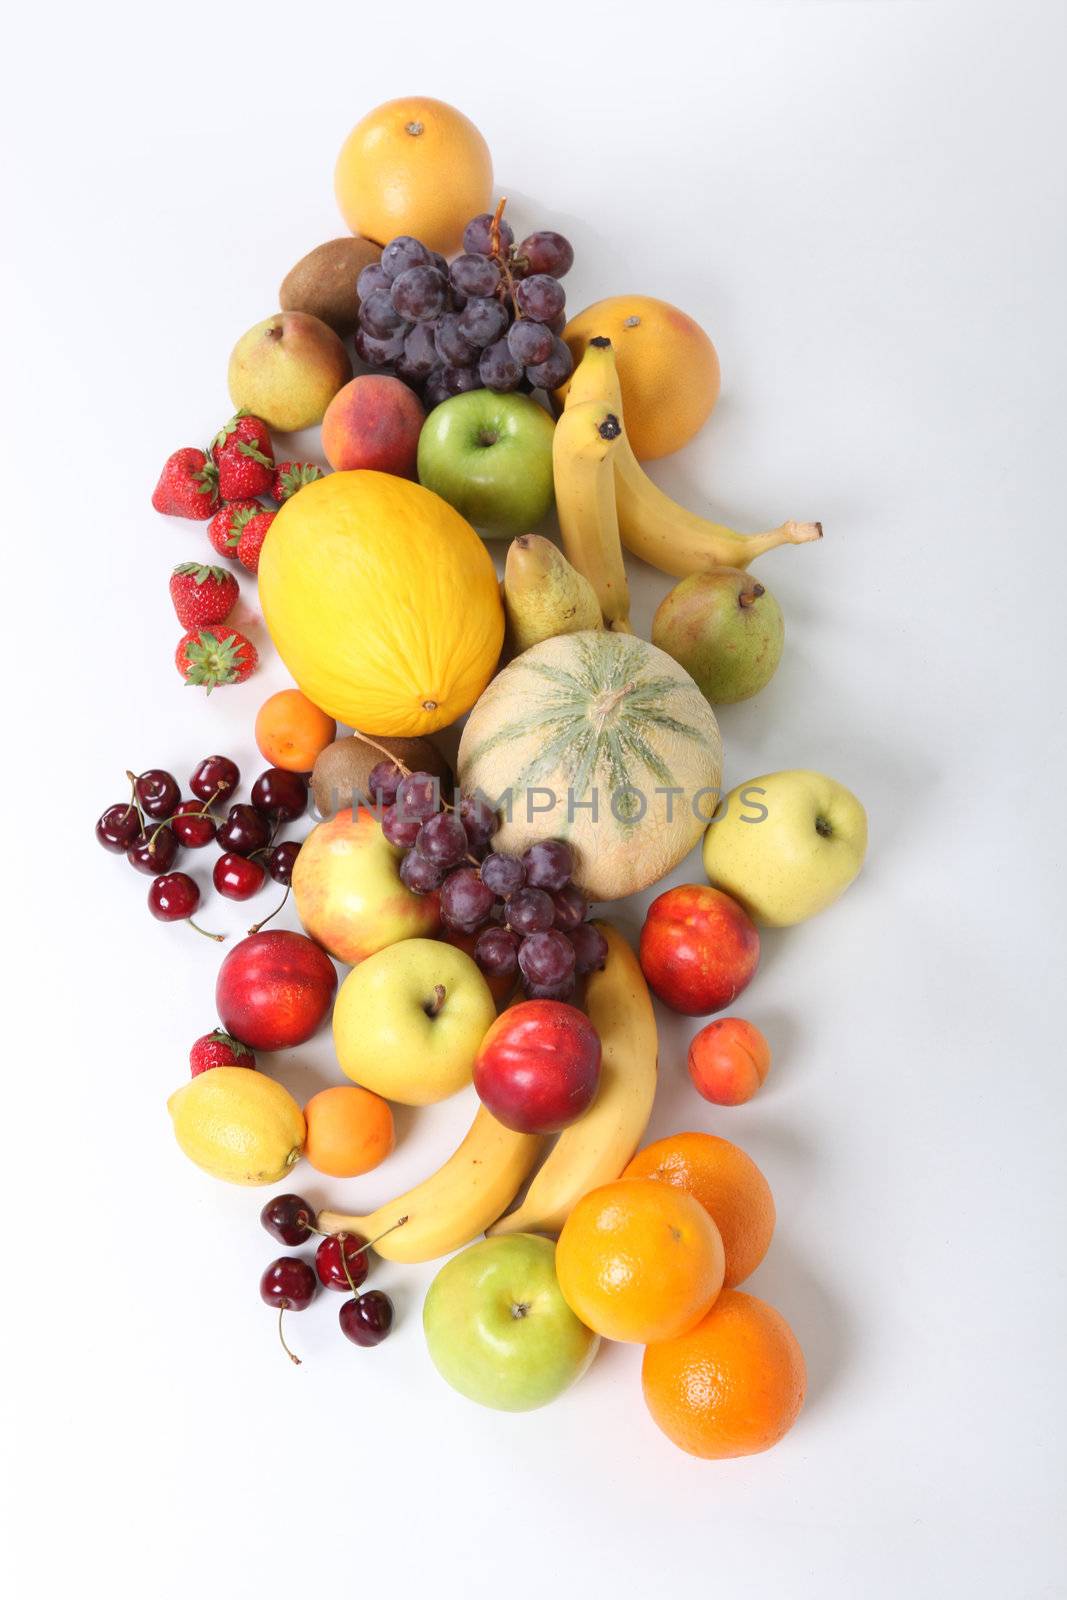 Variety of fruits by phovoir